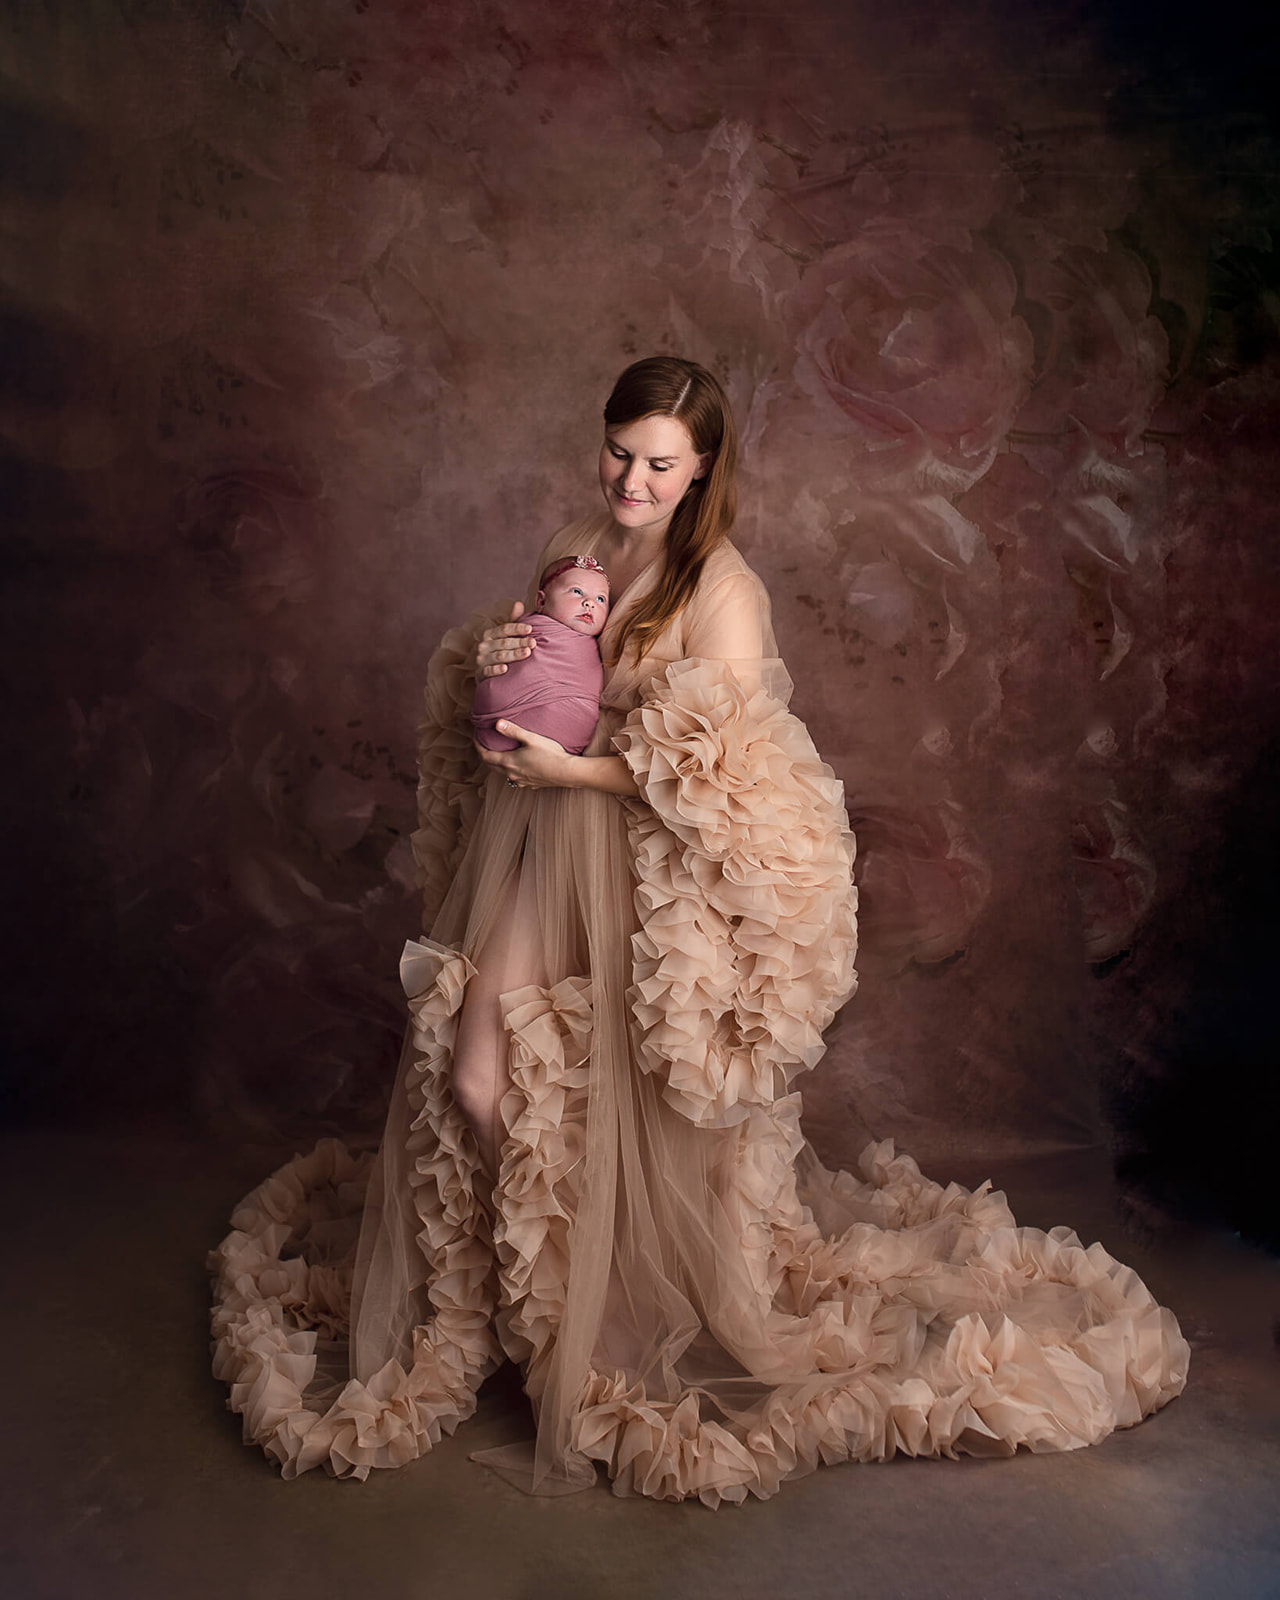 Akron OH newborn photographer captures loving and elegant moment between mom and newborn